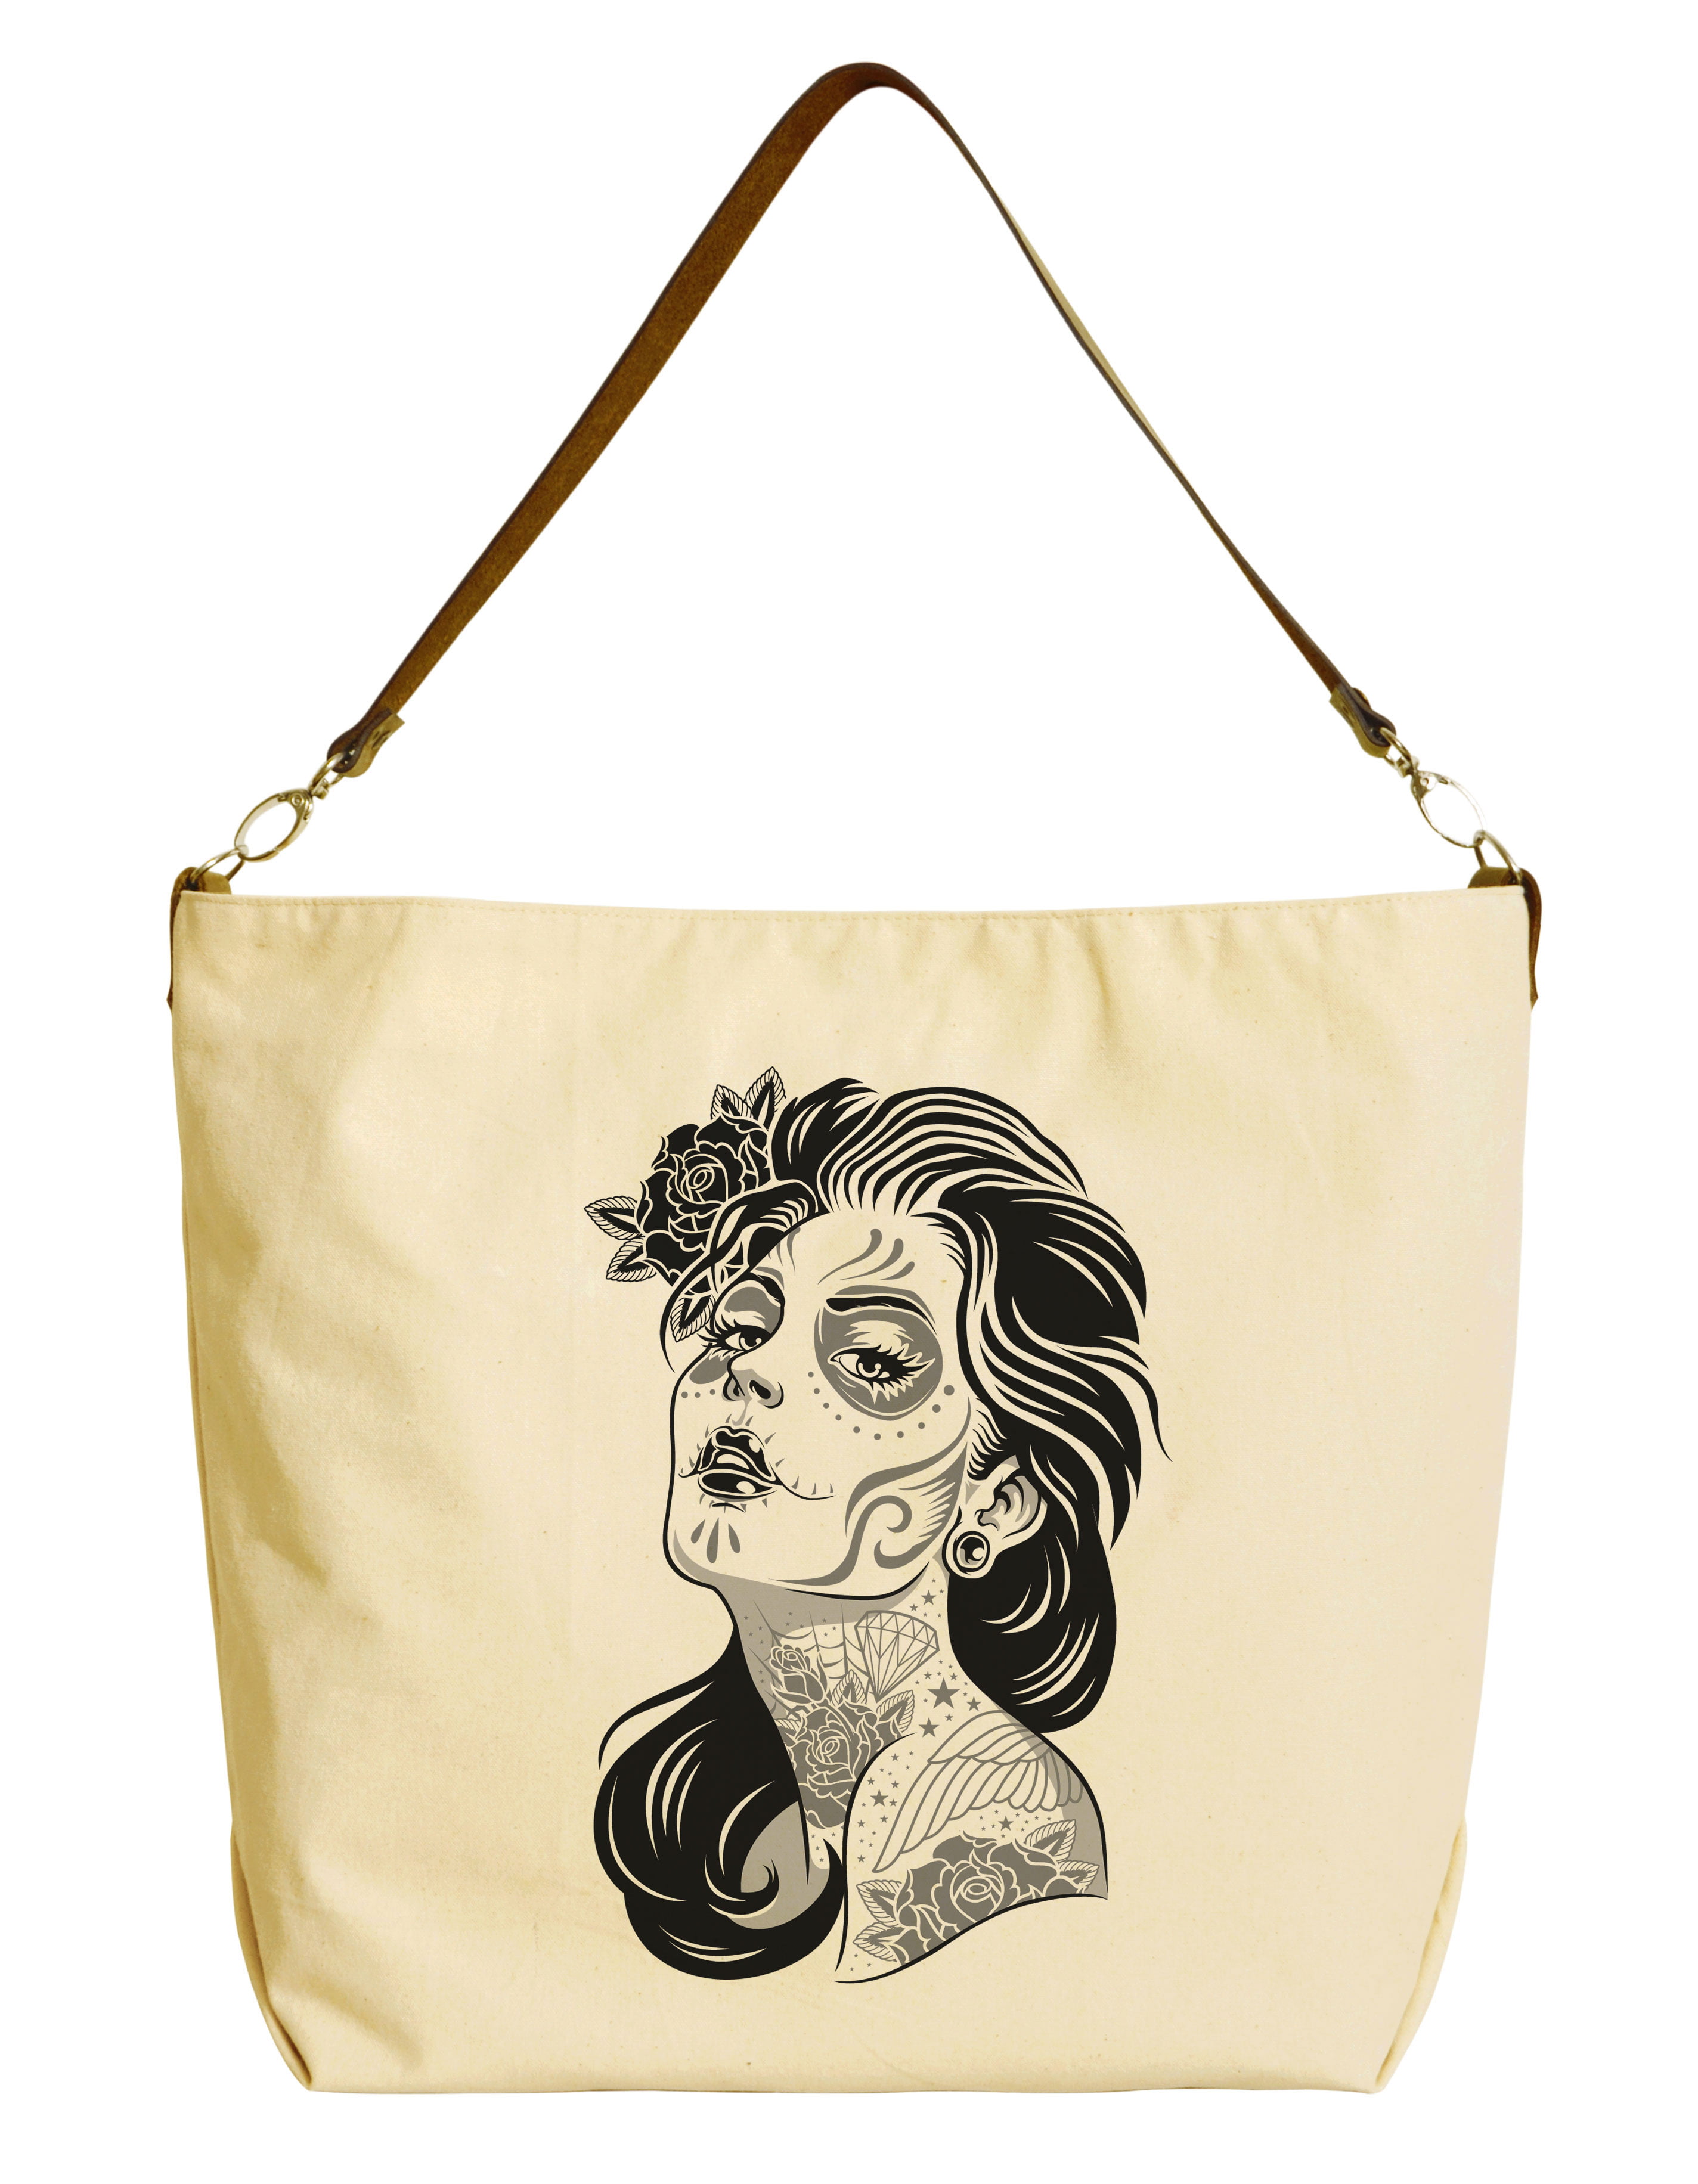 Lady Tote Portrait Of A Beautiful Girl Death Leather Hand Totes Bag Causal Handbags Zipped Shoulder Organizer For Lady Girls Womens Teacher Tote